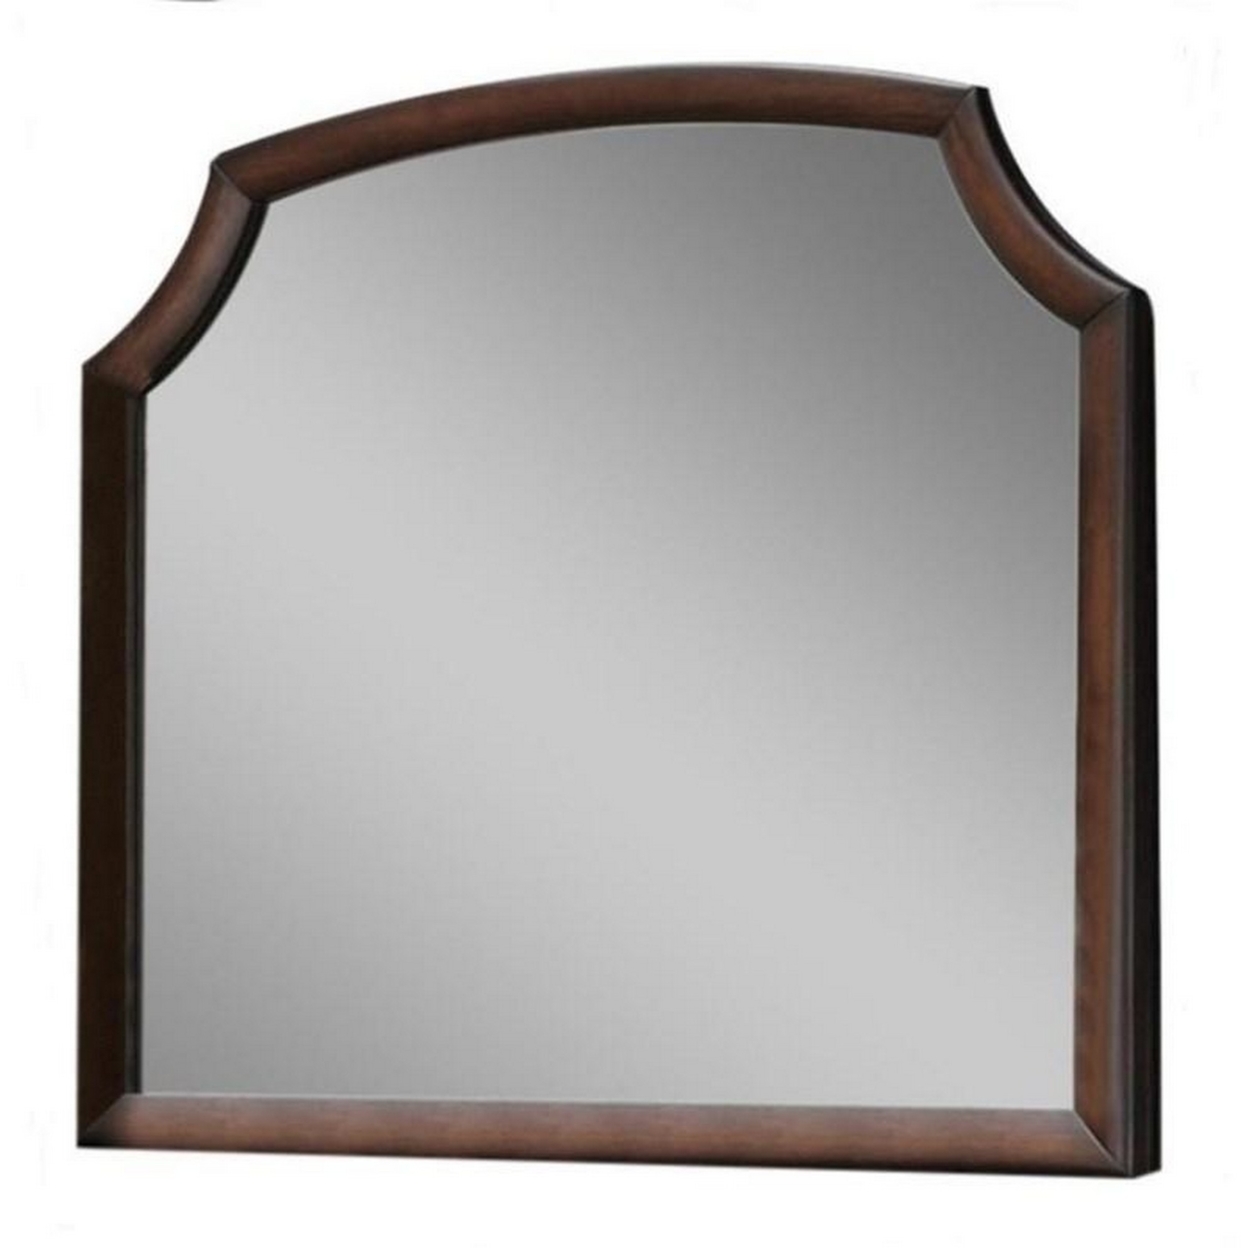 Transitional Style Wooden Wall Mirror With Beveled Edges, Espresso- Saltoro Sherpi